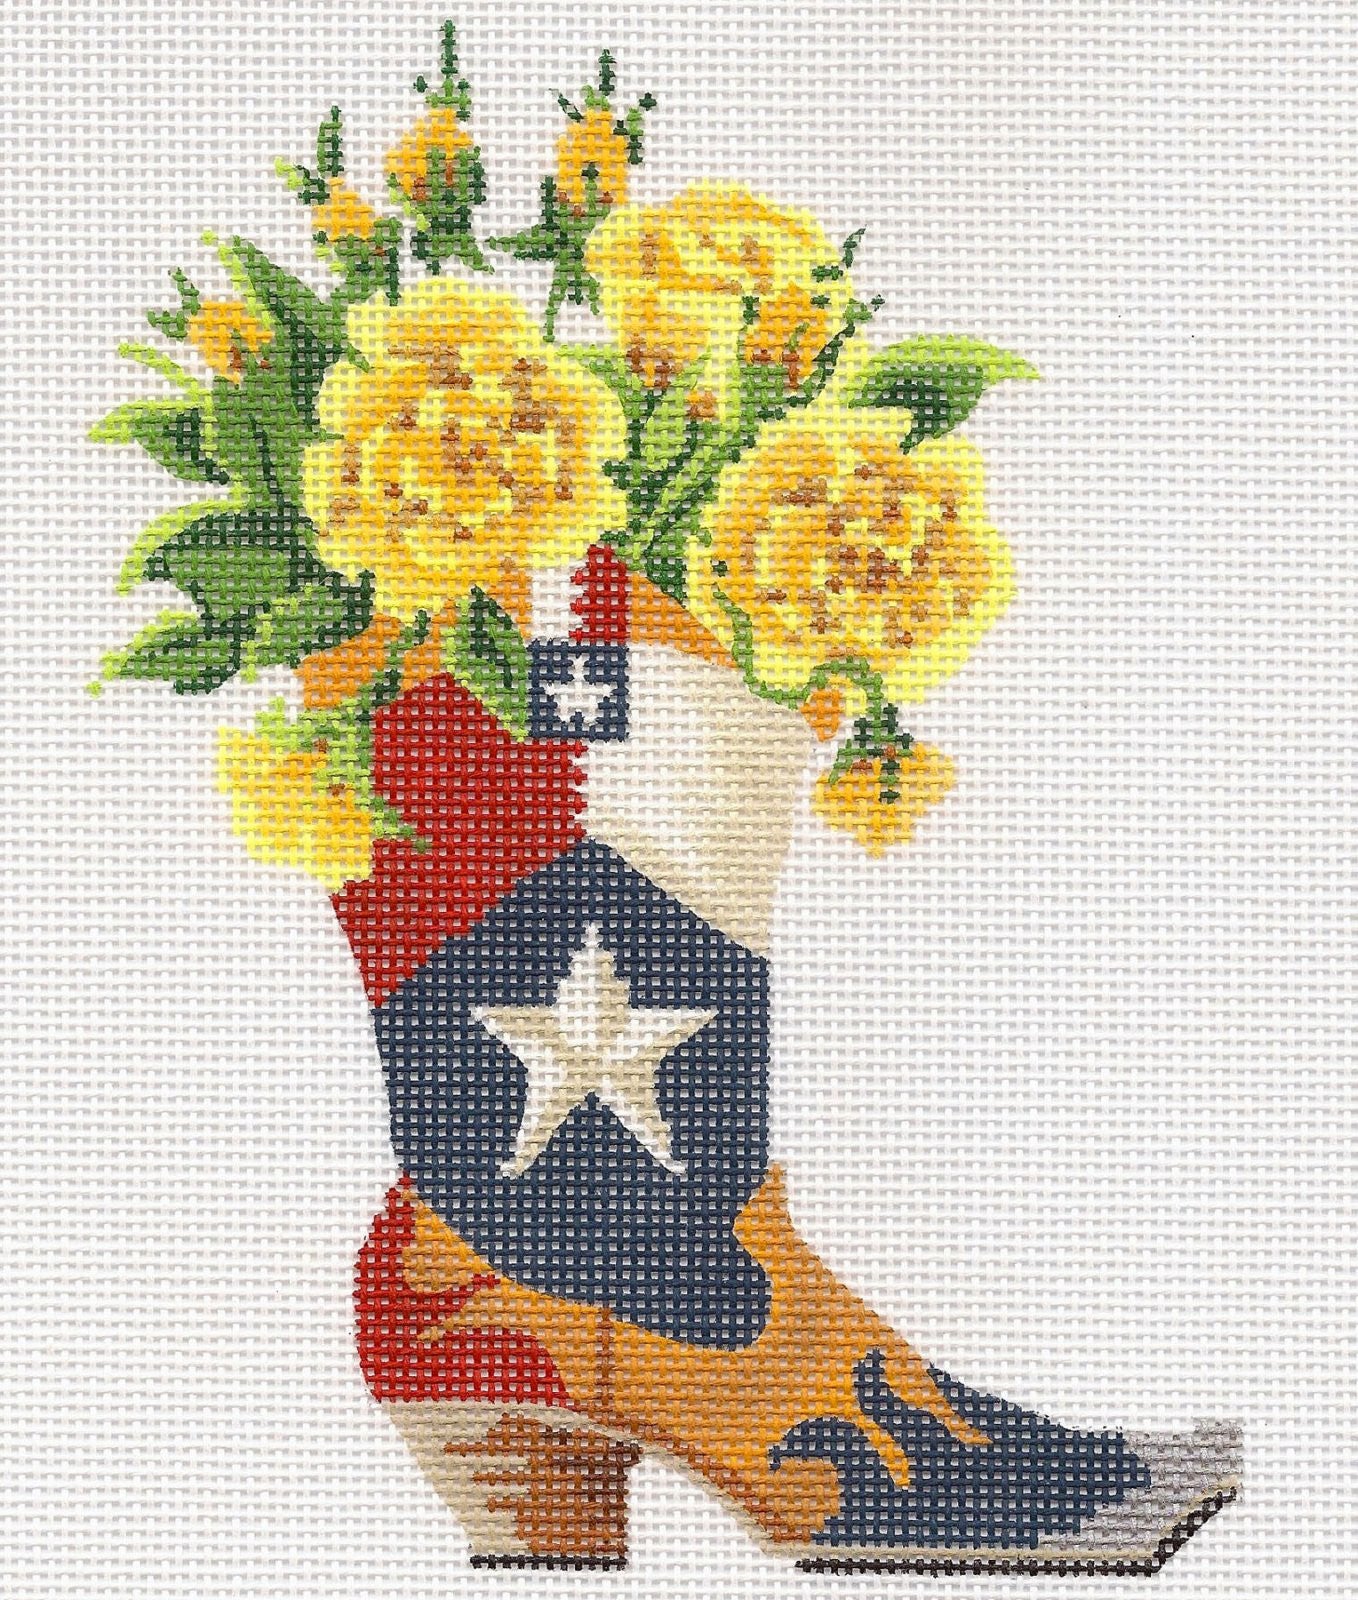 TEXAS ~ Texas Lonestar Boot with Yellow Roses handpainted Needlepoint Canvas by Kelly Clark